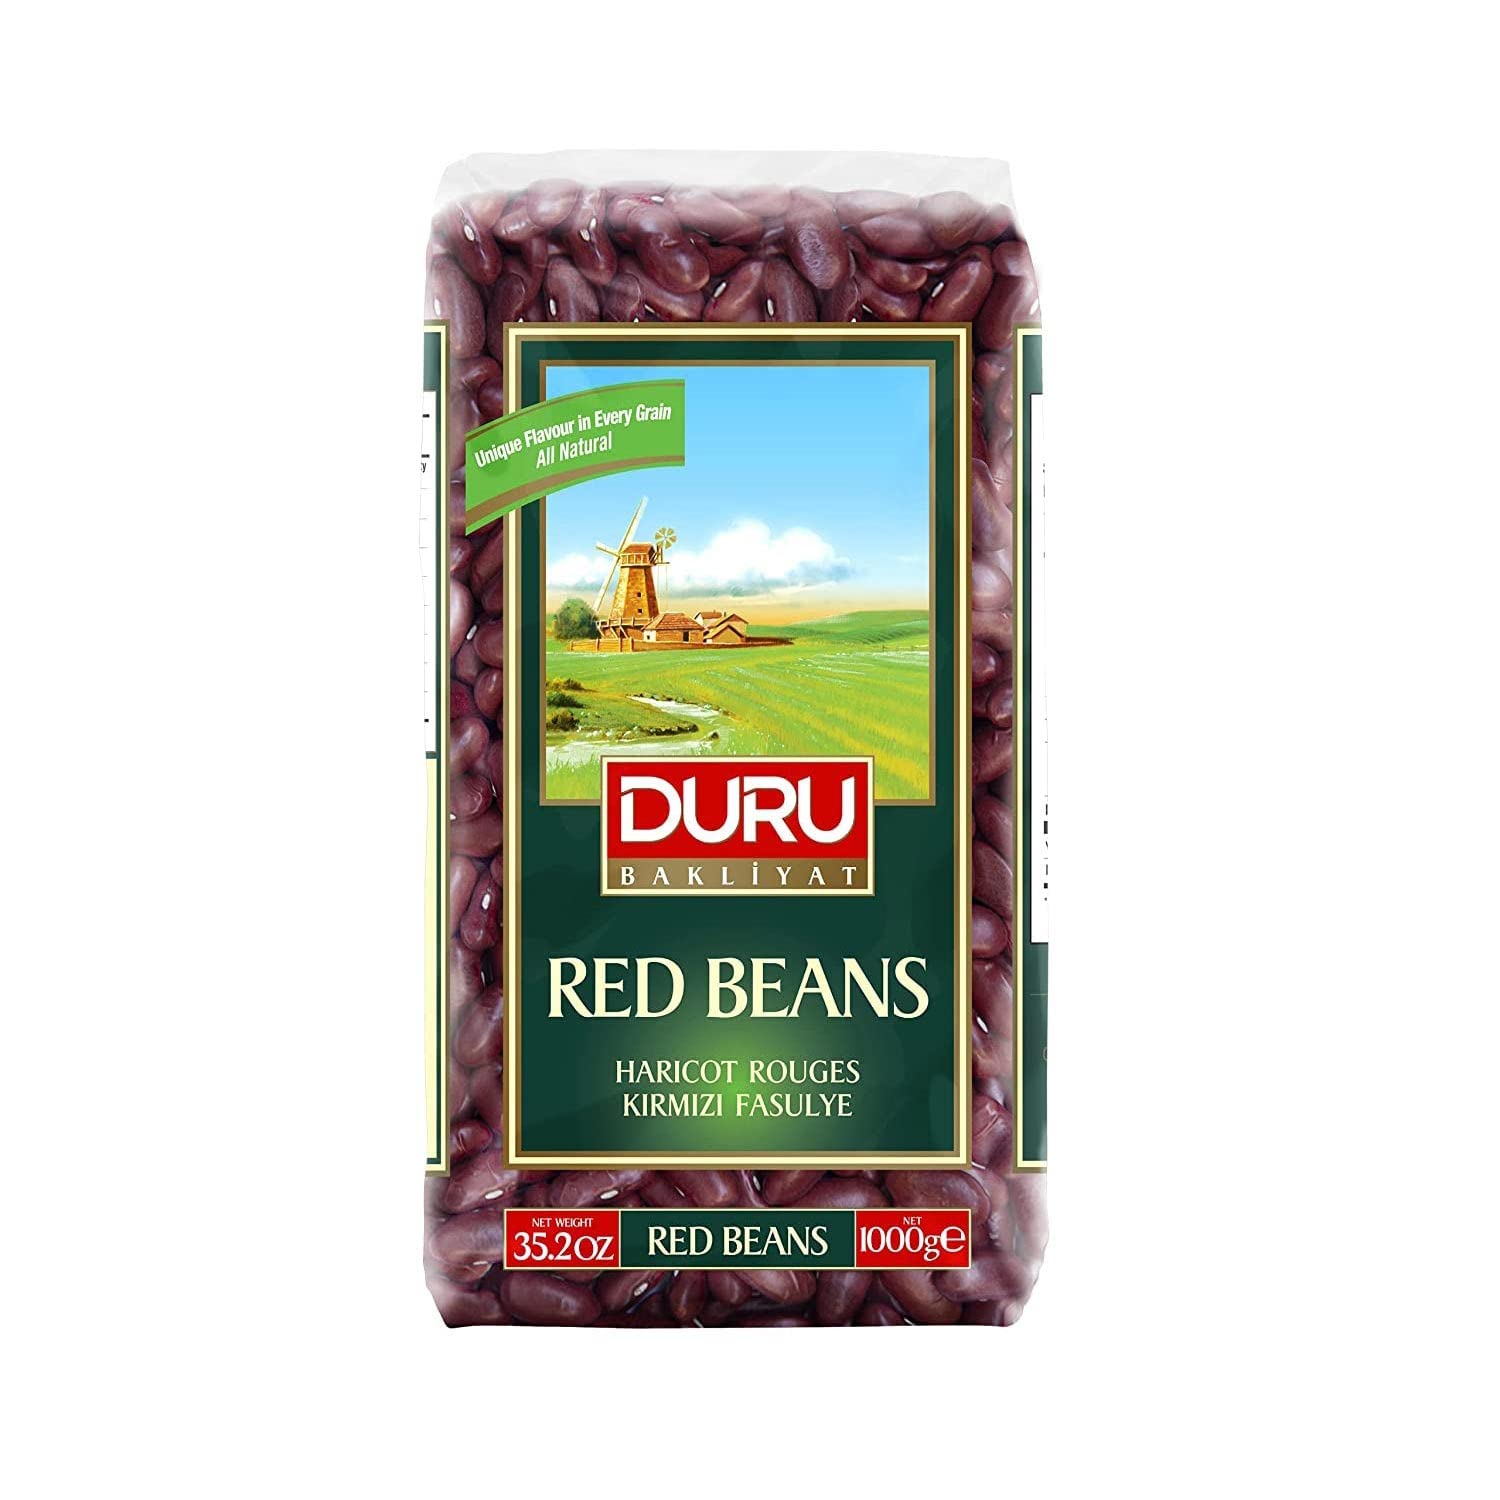 Duru Dried Red Beans, 35.2oz (1000g), 100% Natural and Certificated, High Fiber and Protein, Non-GMO, Great for Vegan Recipes, Gluten Free